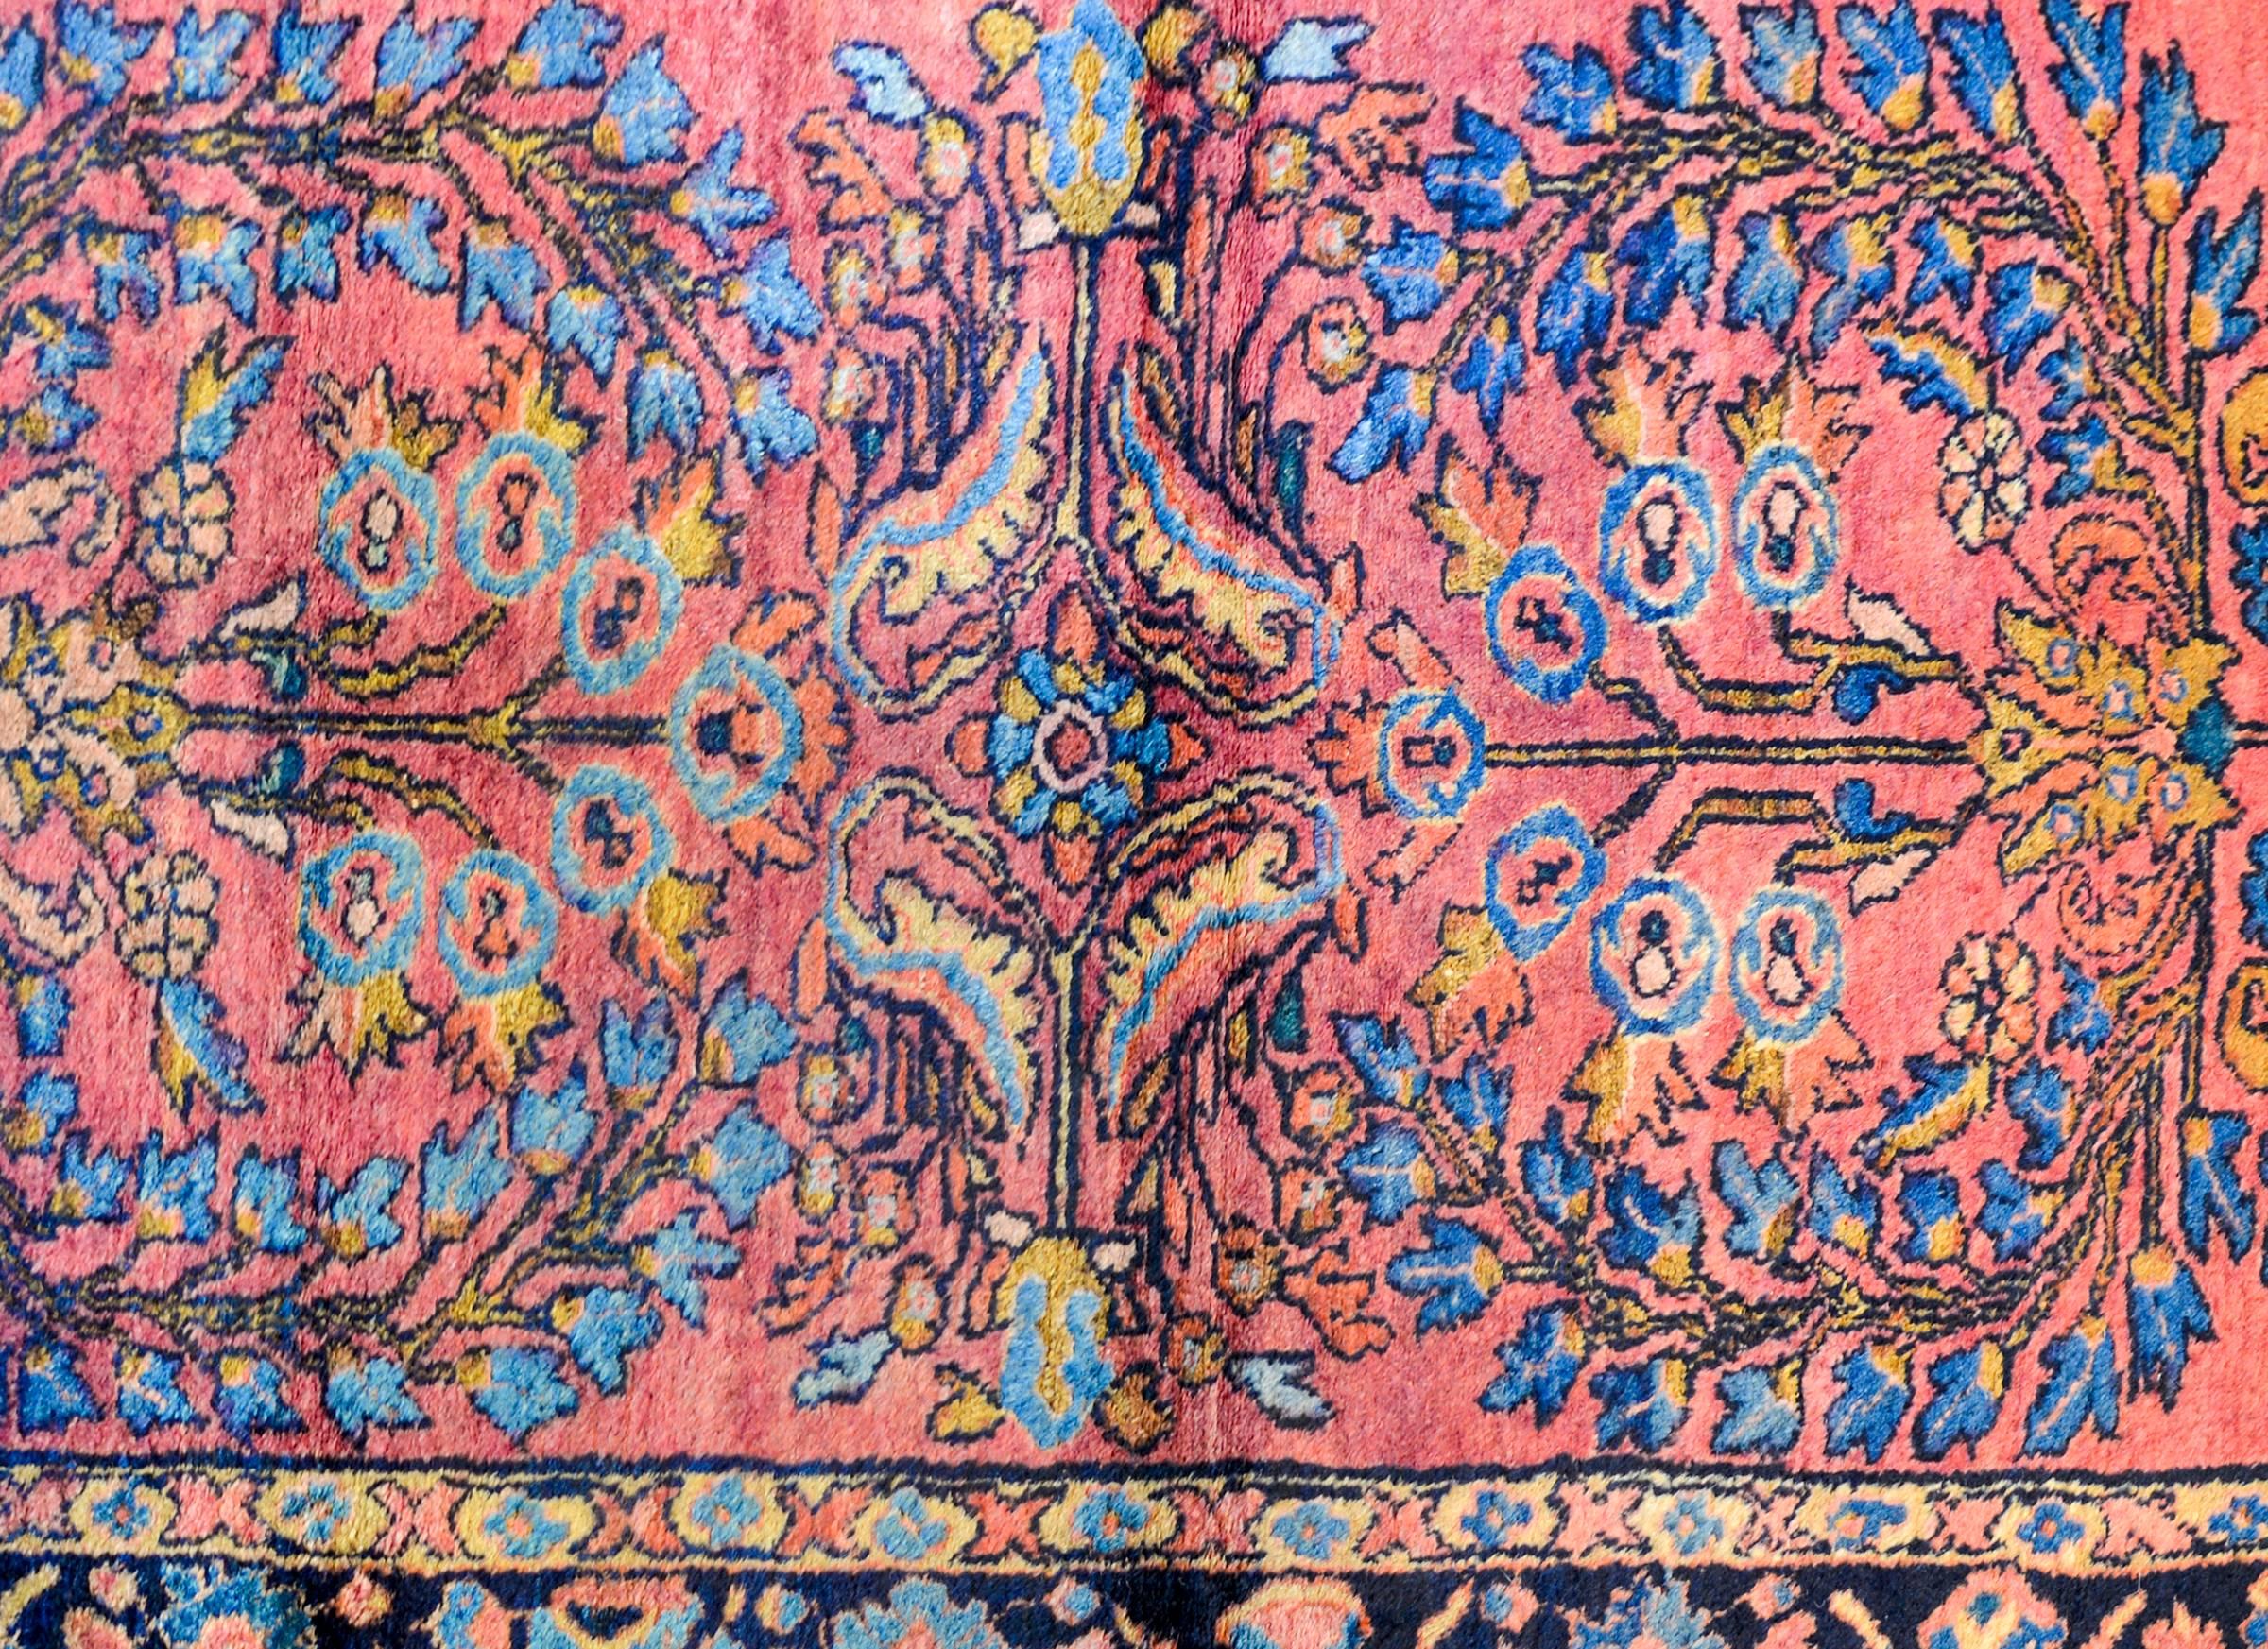 An early 20th century Persian Lilihan rug with a beautiful mirrored tree-of-life pattern woven in indigo, orange, yellow and pink vegetable dyed wool. The border is contrasting with a petite floral and leaf pattern woven on a dark indigo background.